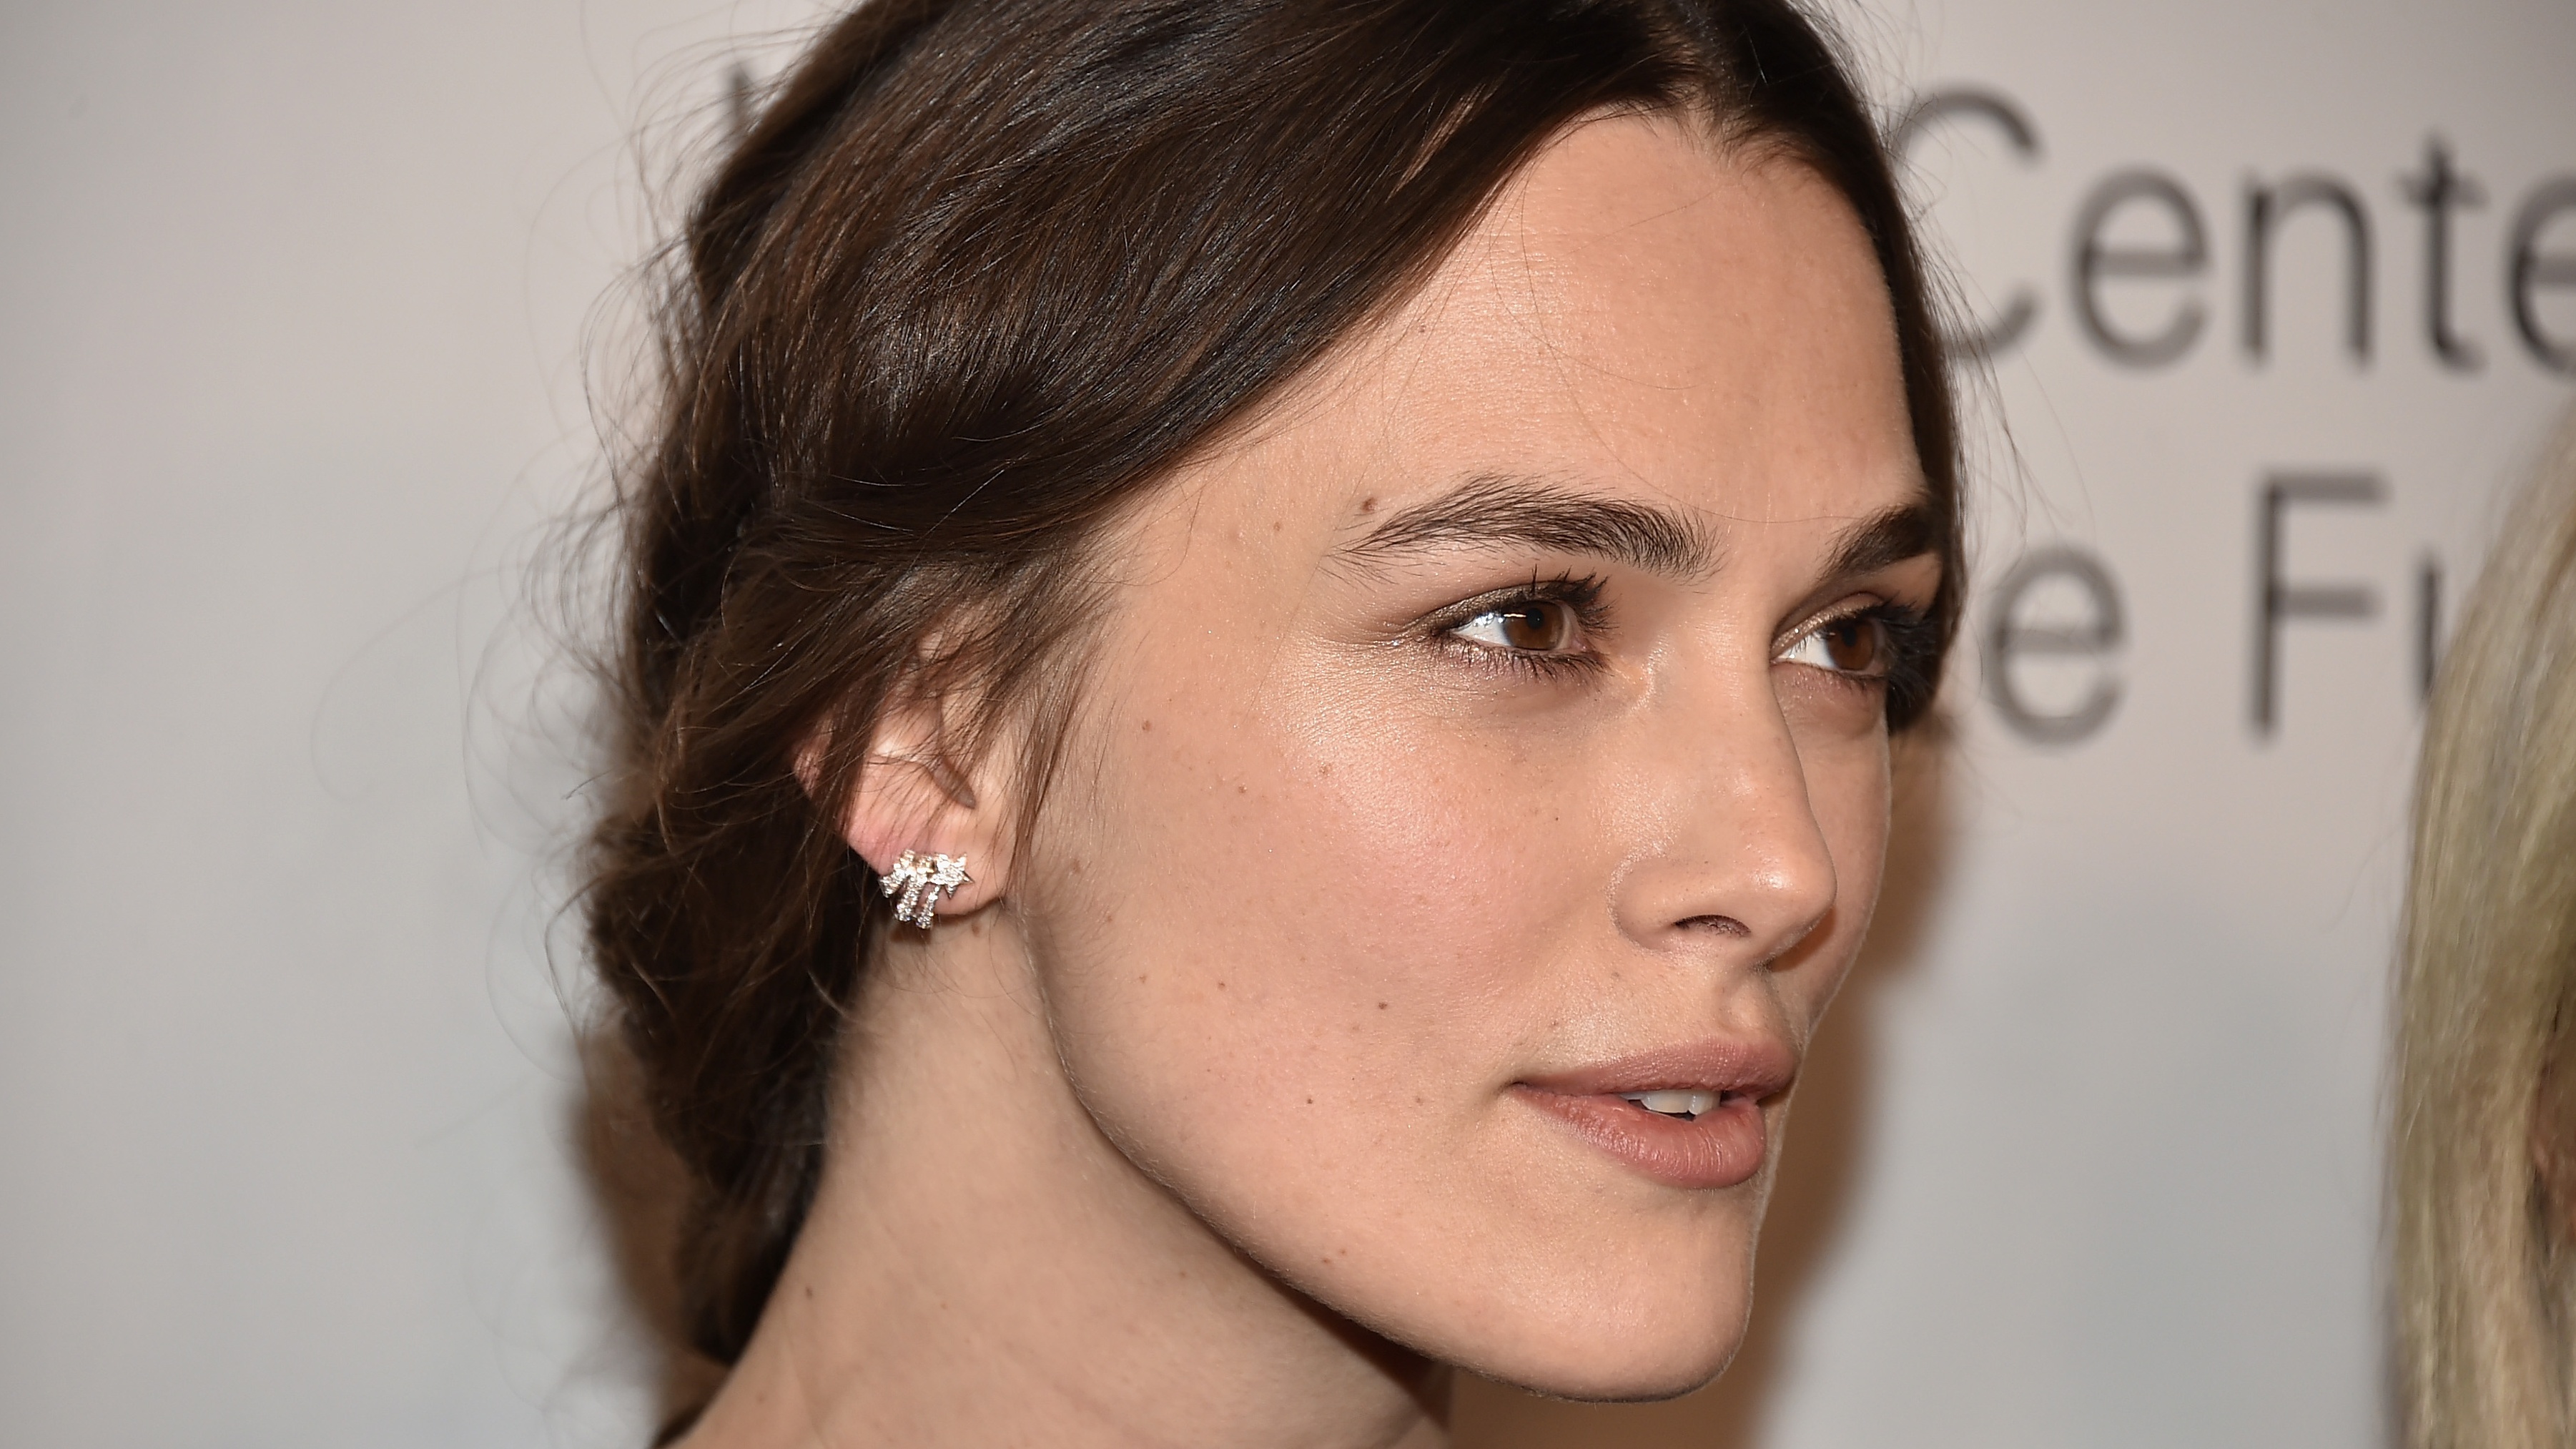 Kiera Knightly Just Opened Up About This Hush-Hush Women’s Condition